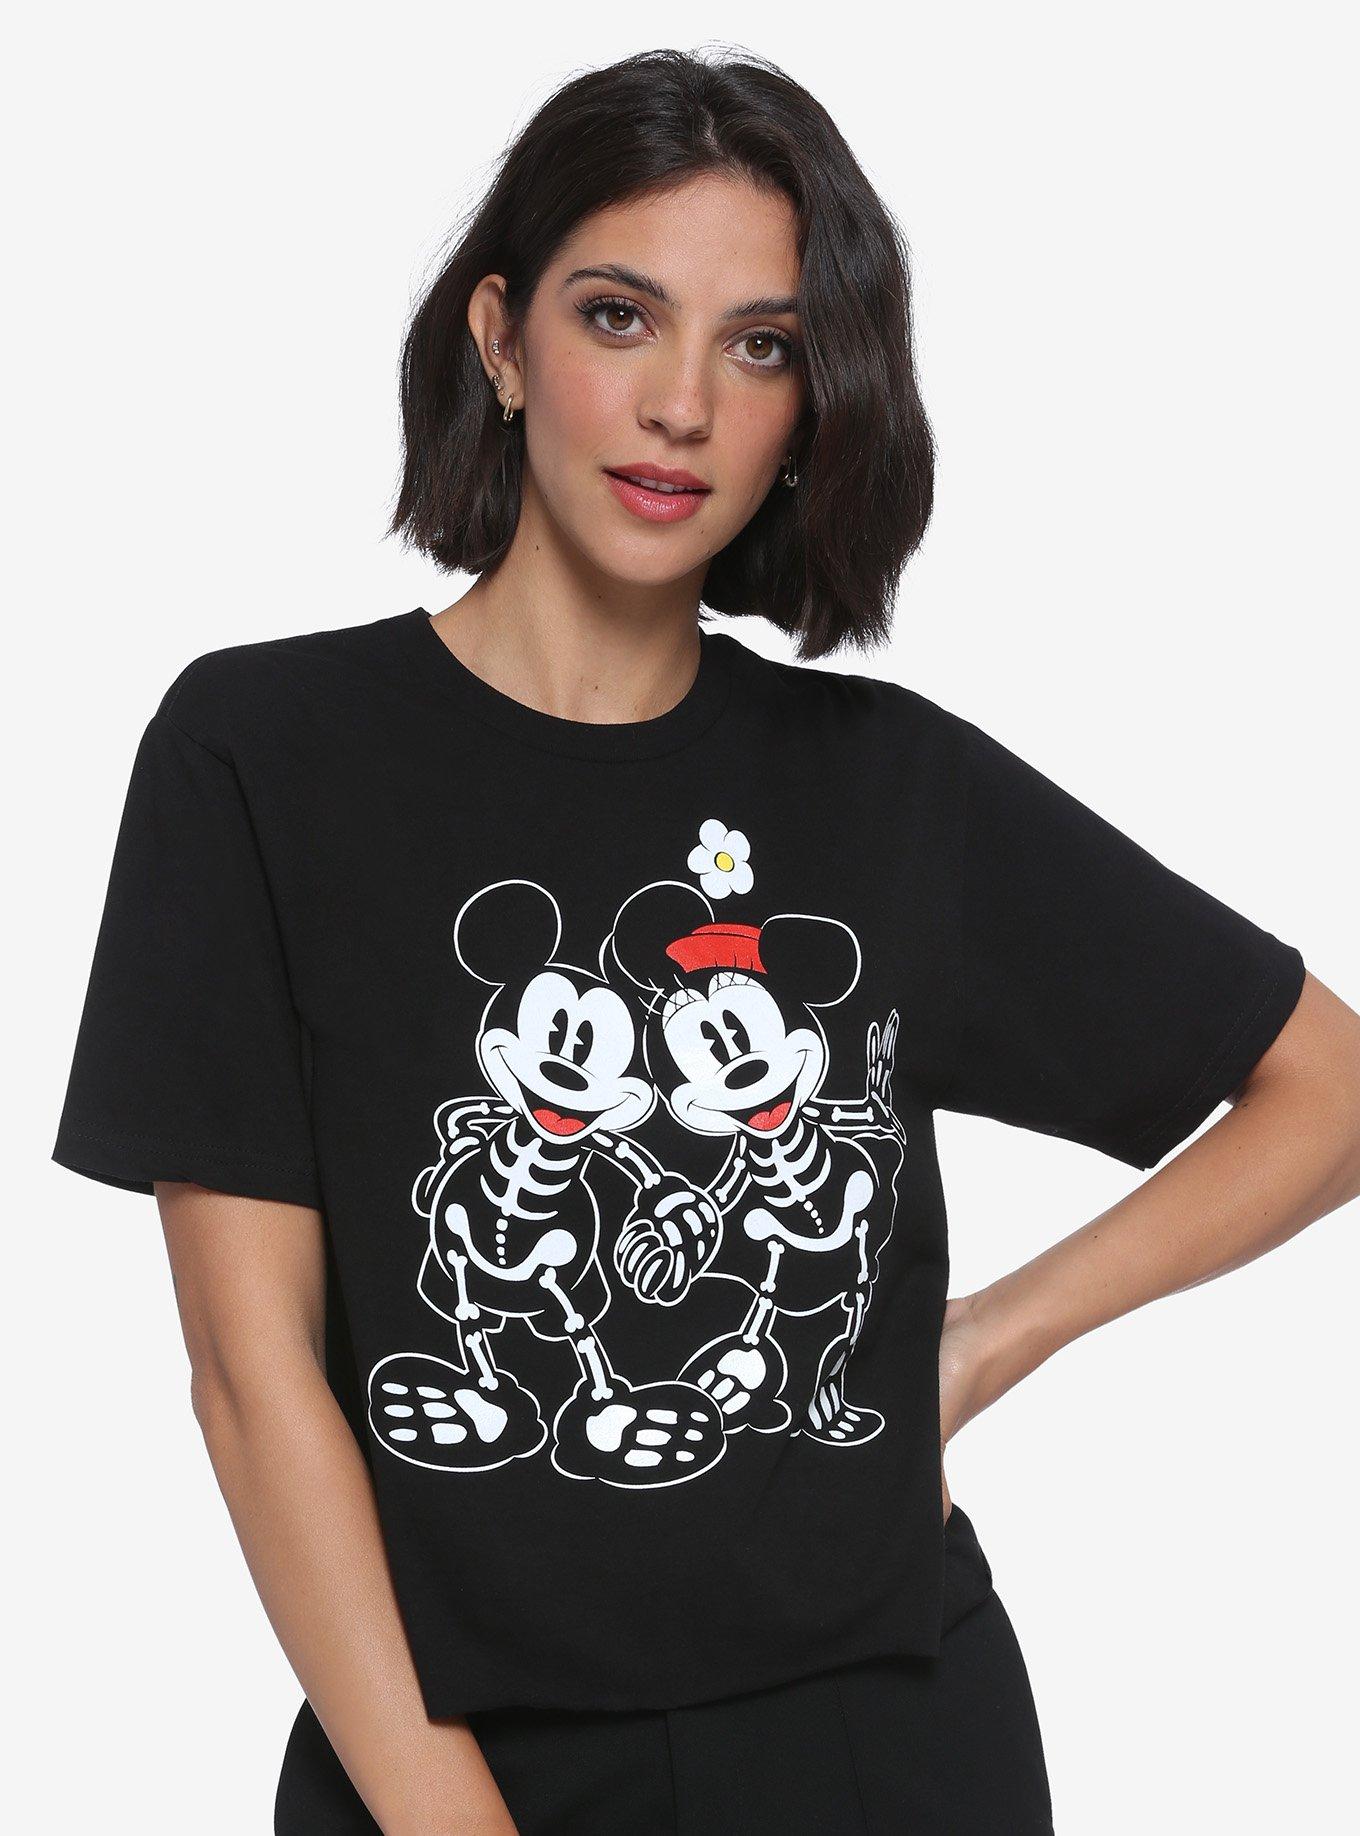 I Don't Do Matching Shirts Angry Mickey Mouse, I do Minnie Mouse